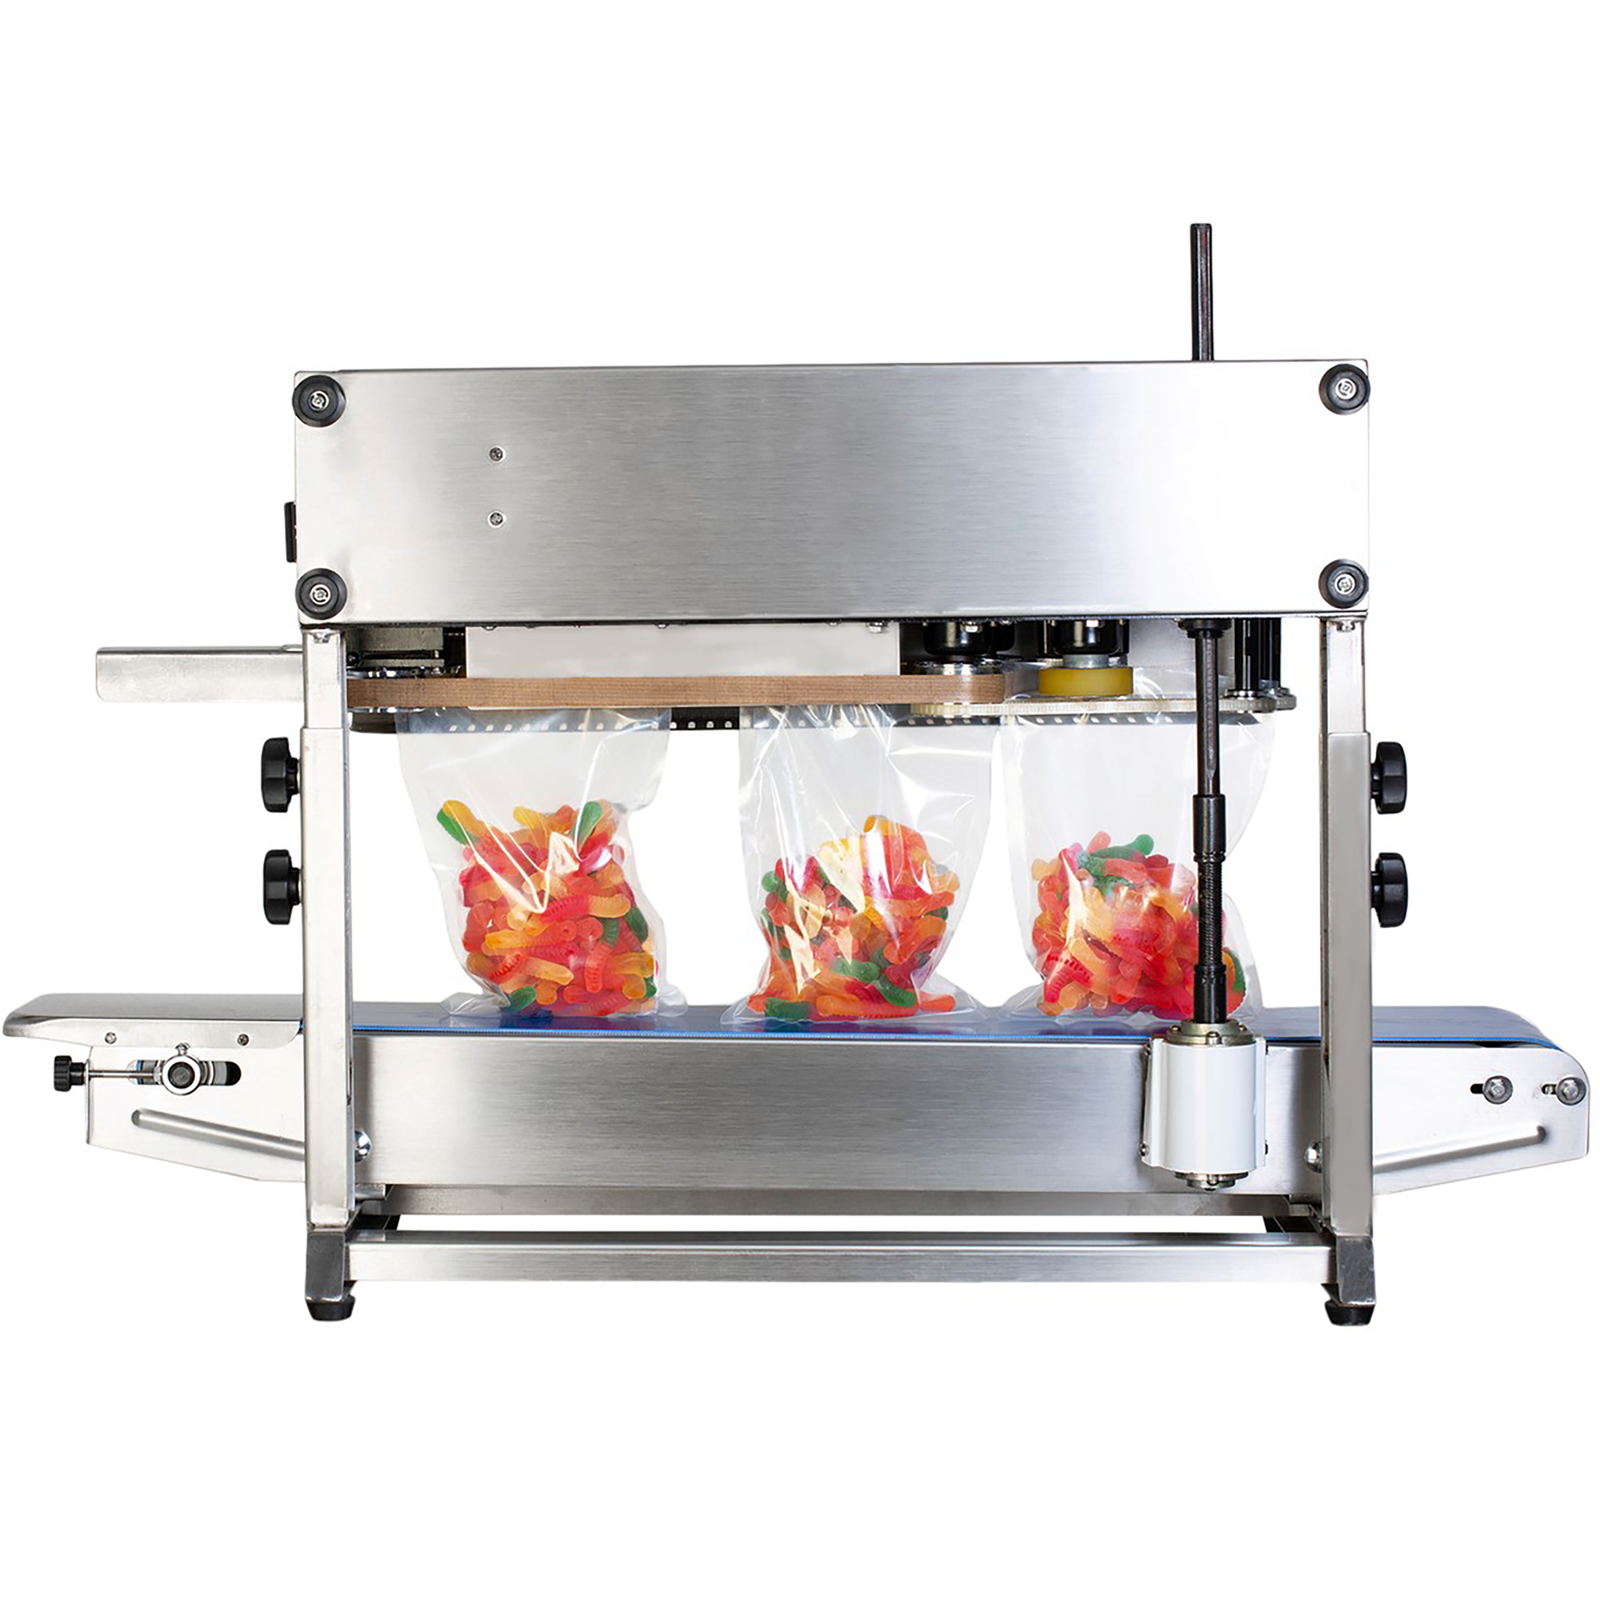 JORES TECHNOLOGIES® stainless steel continuous band sealing machine while it is sealing clear plastic bags filler with colored gummy worms.